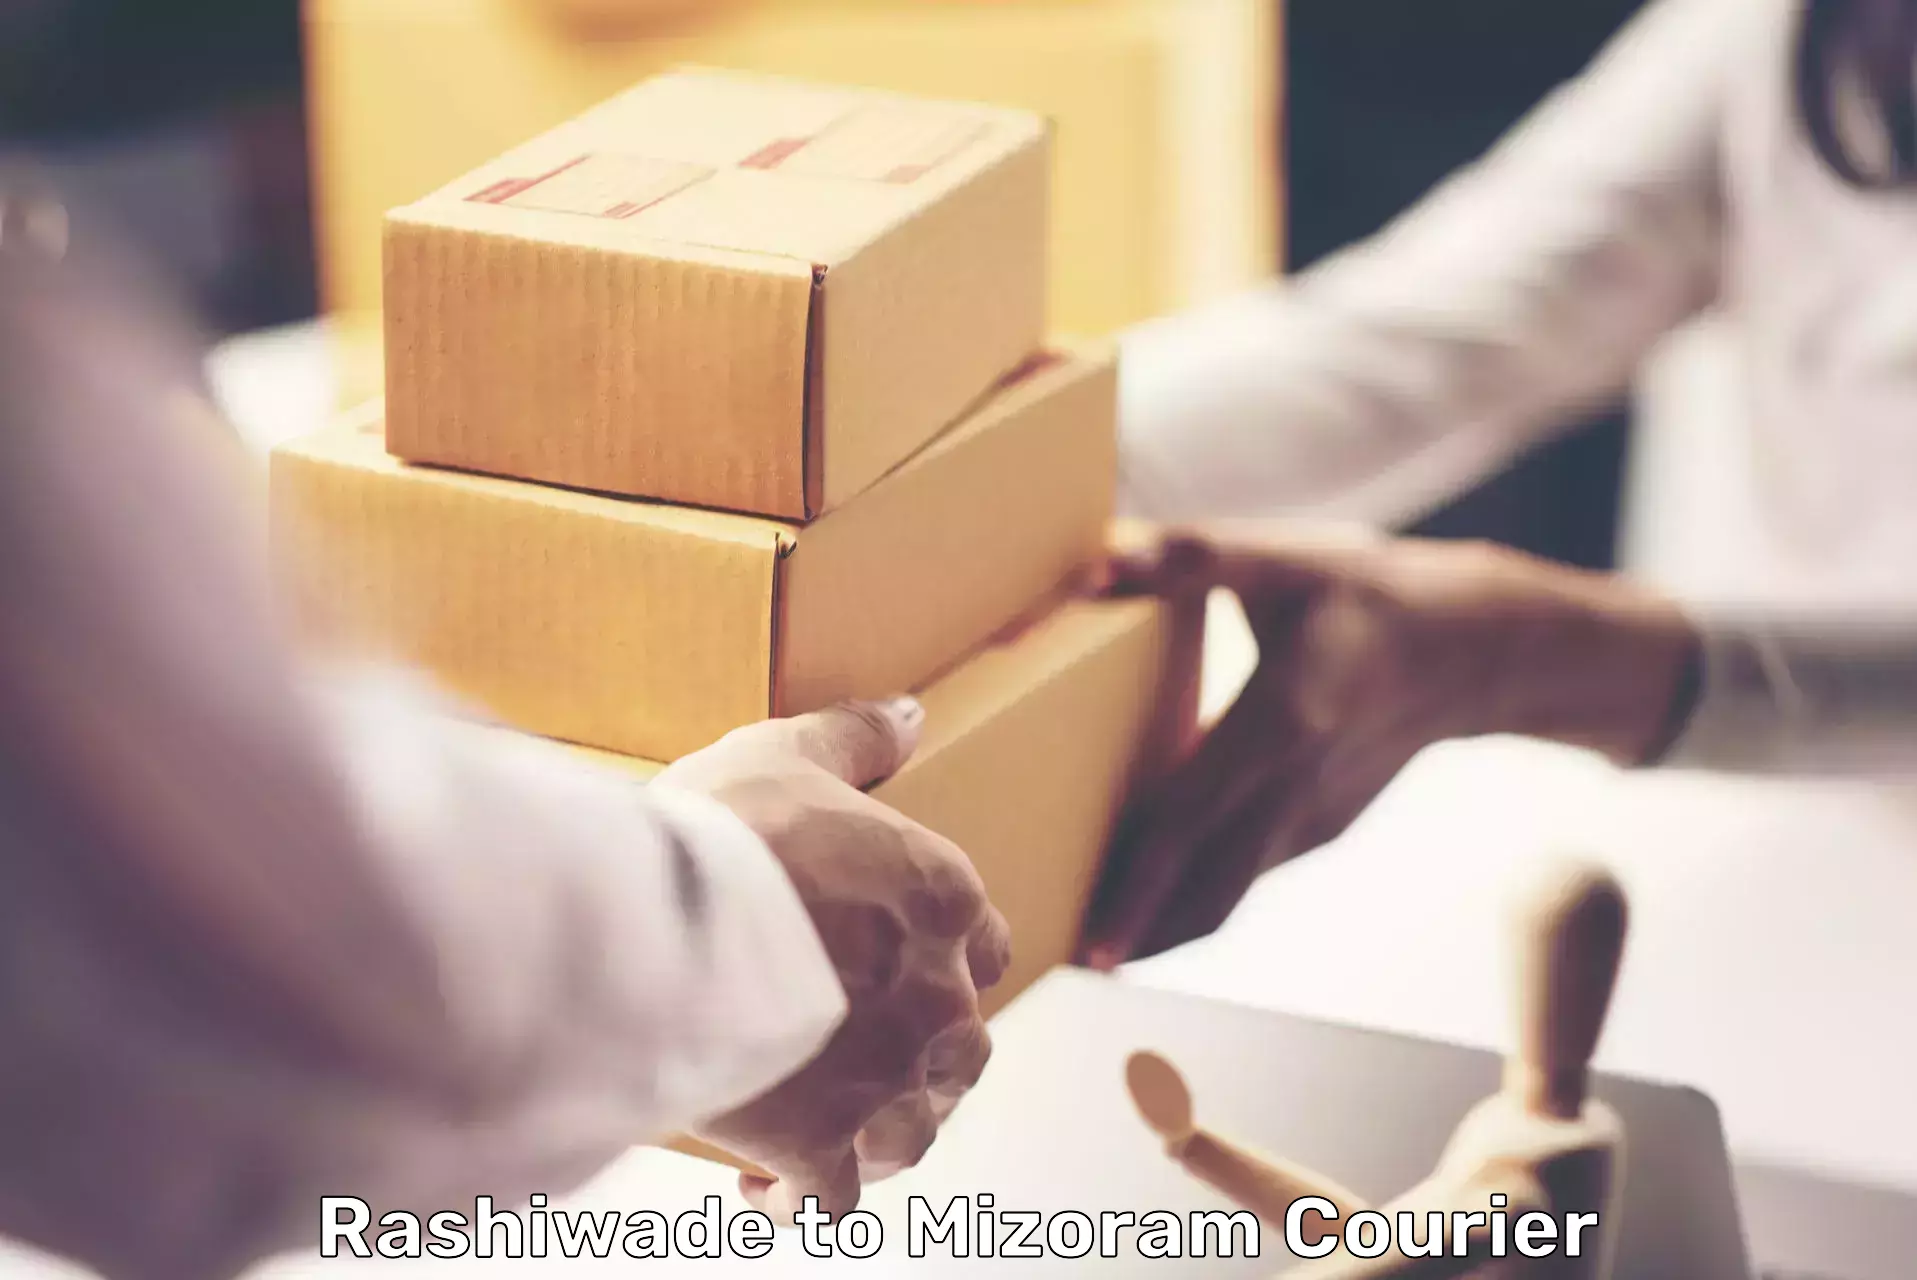 On-call courier service Rashiwade to Darlawn